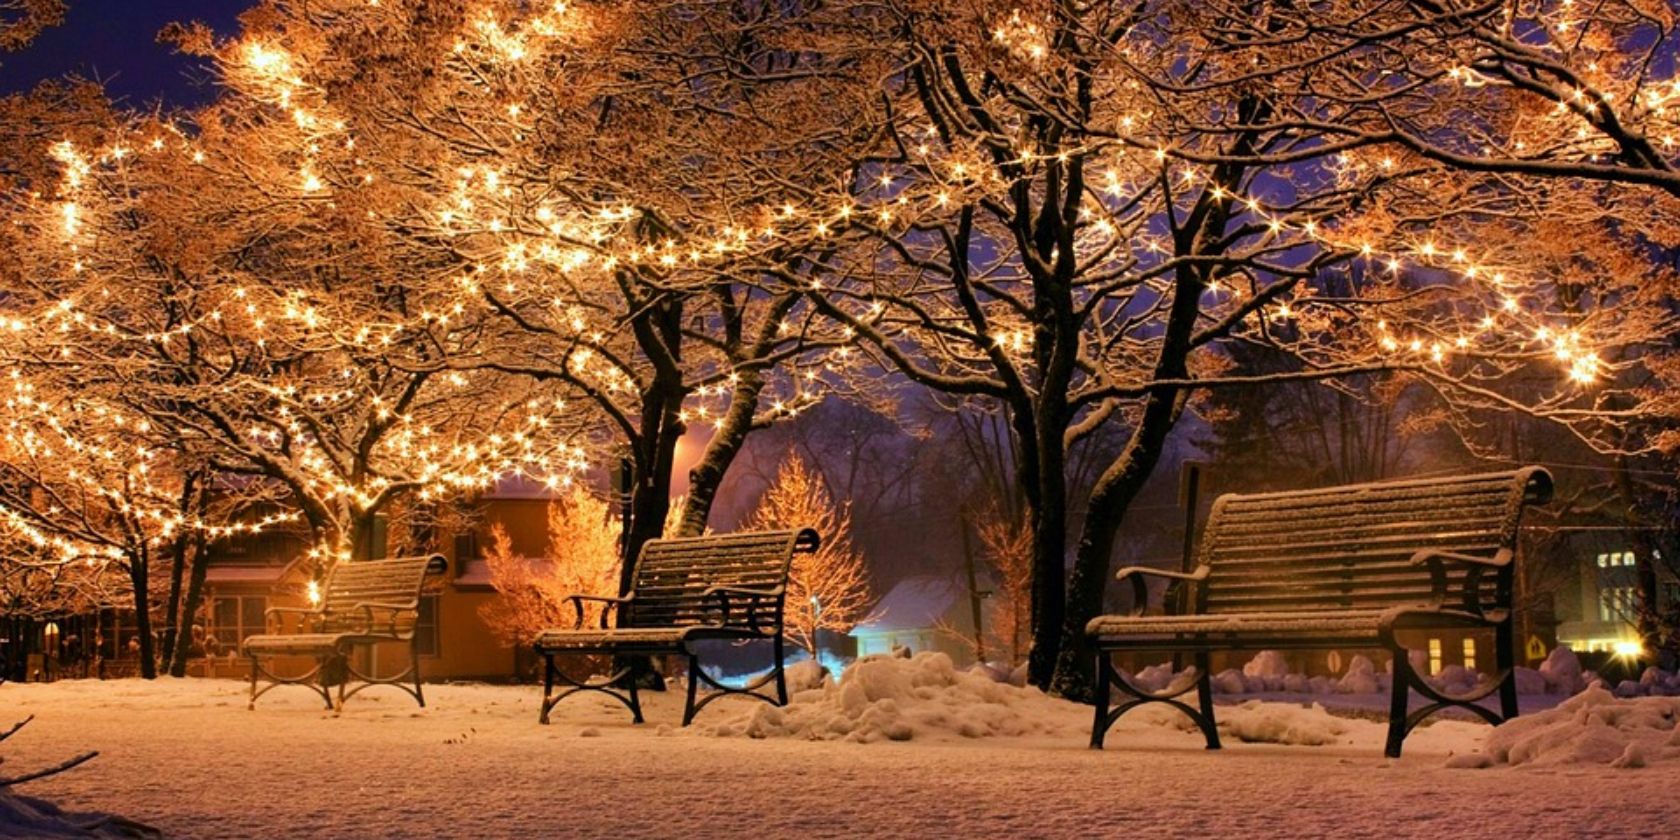 decorated trees and bench in a park